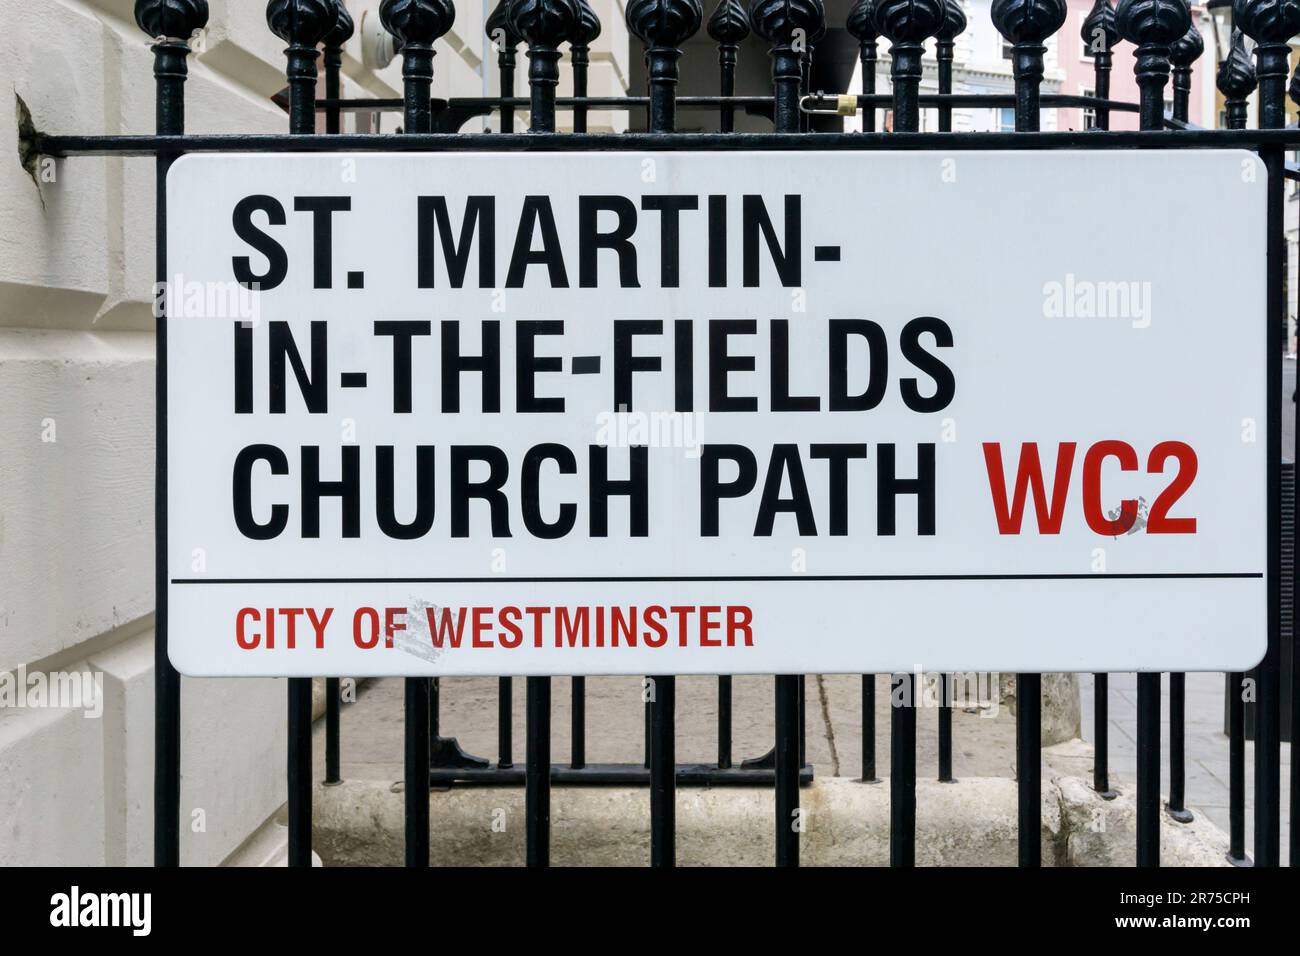 A street sign for St Martin-In-The-Fields Church Path in Westminster, London WC2.  Believed to be London's longest street name. Stock Photo